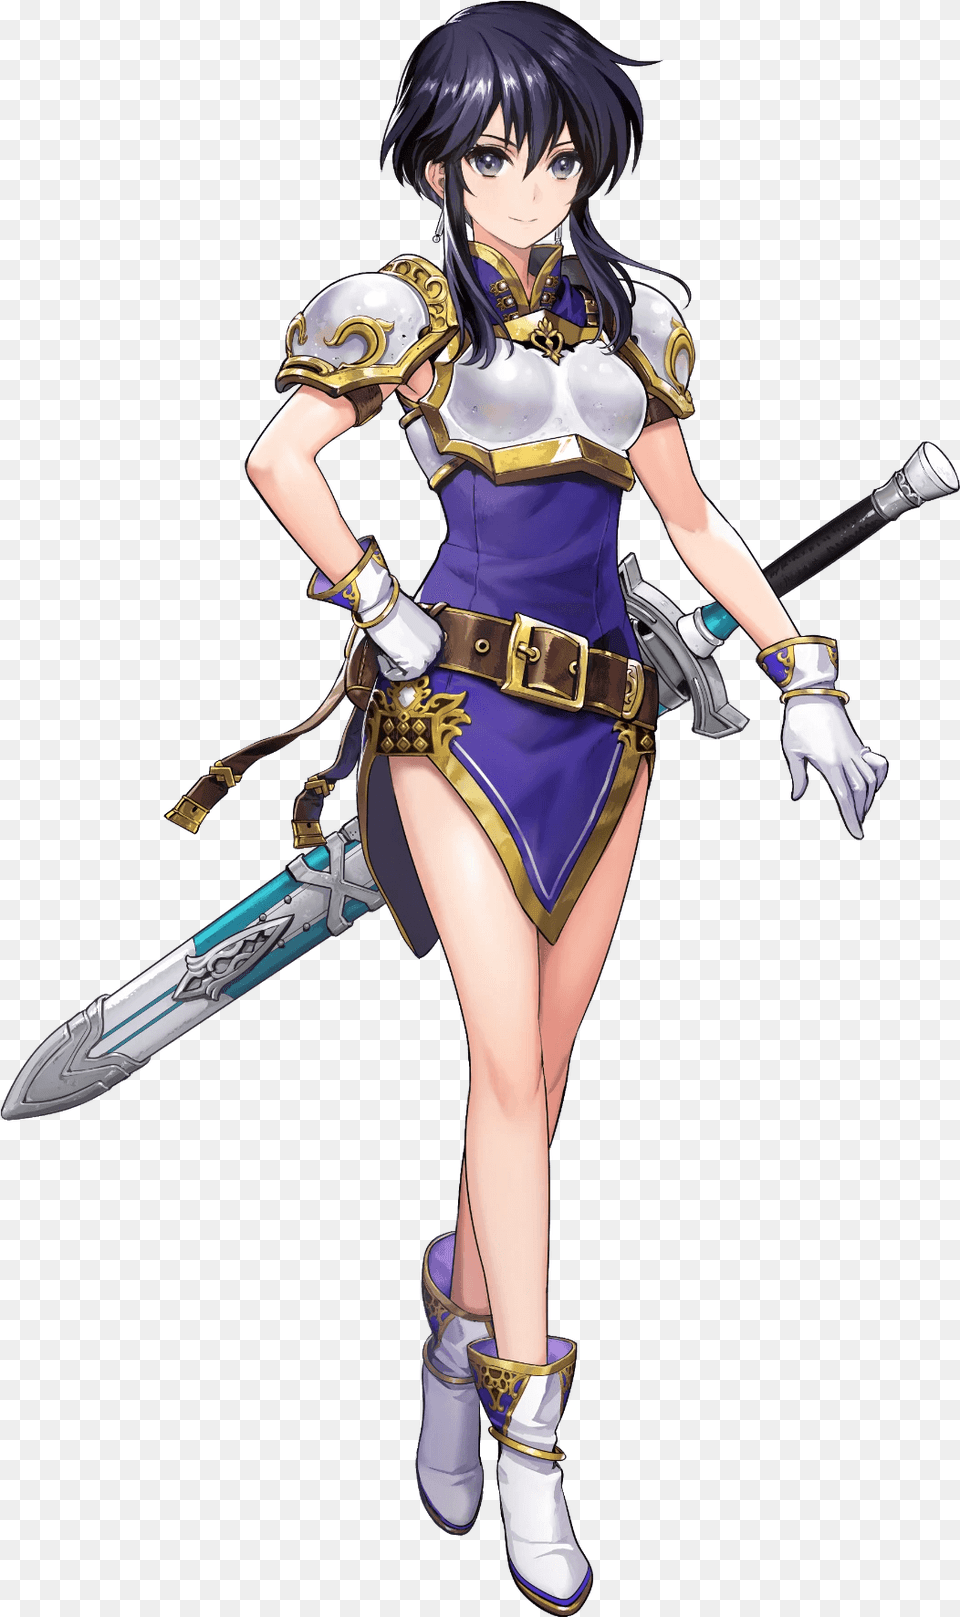 Larcei From Fire Emblem Heroes Transitiongoals Fire Emblem Heroes Larcei, Publication, Book, Comics, Adult Png